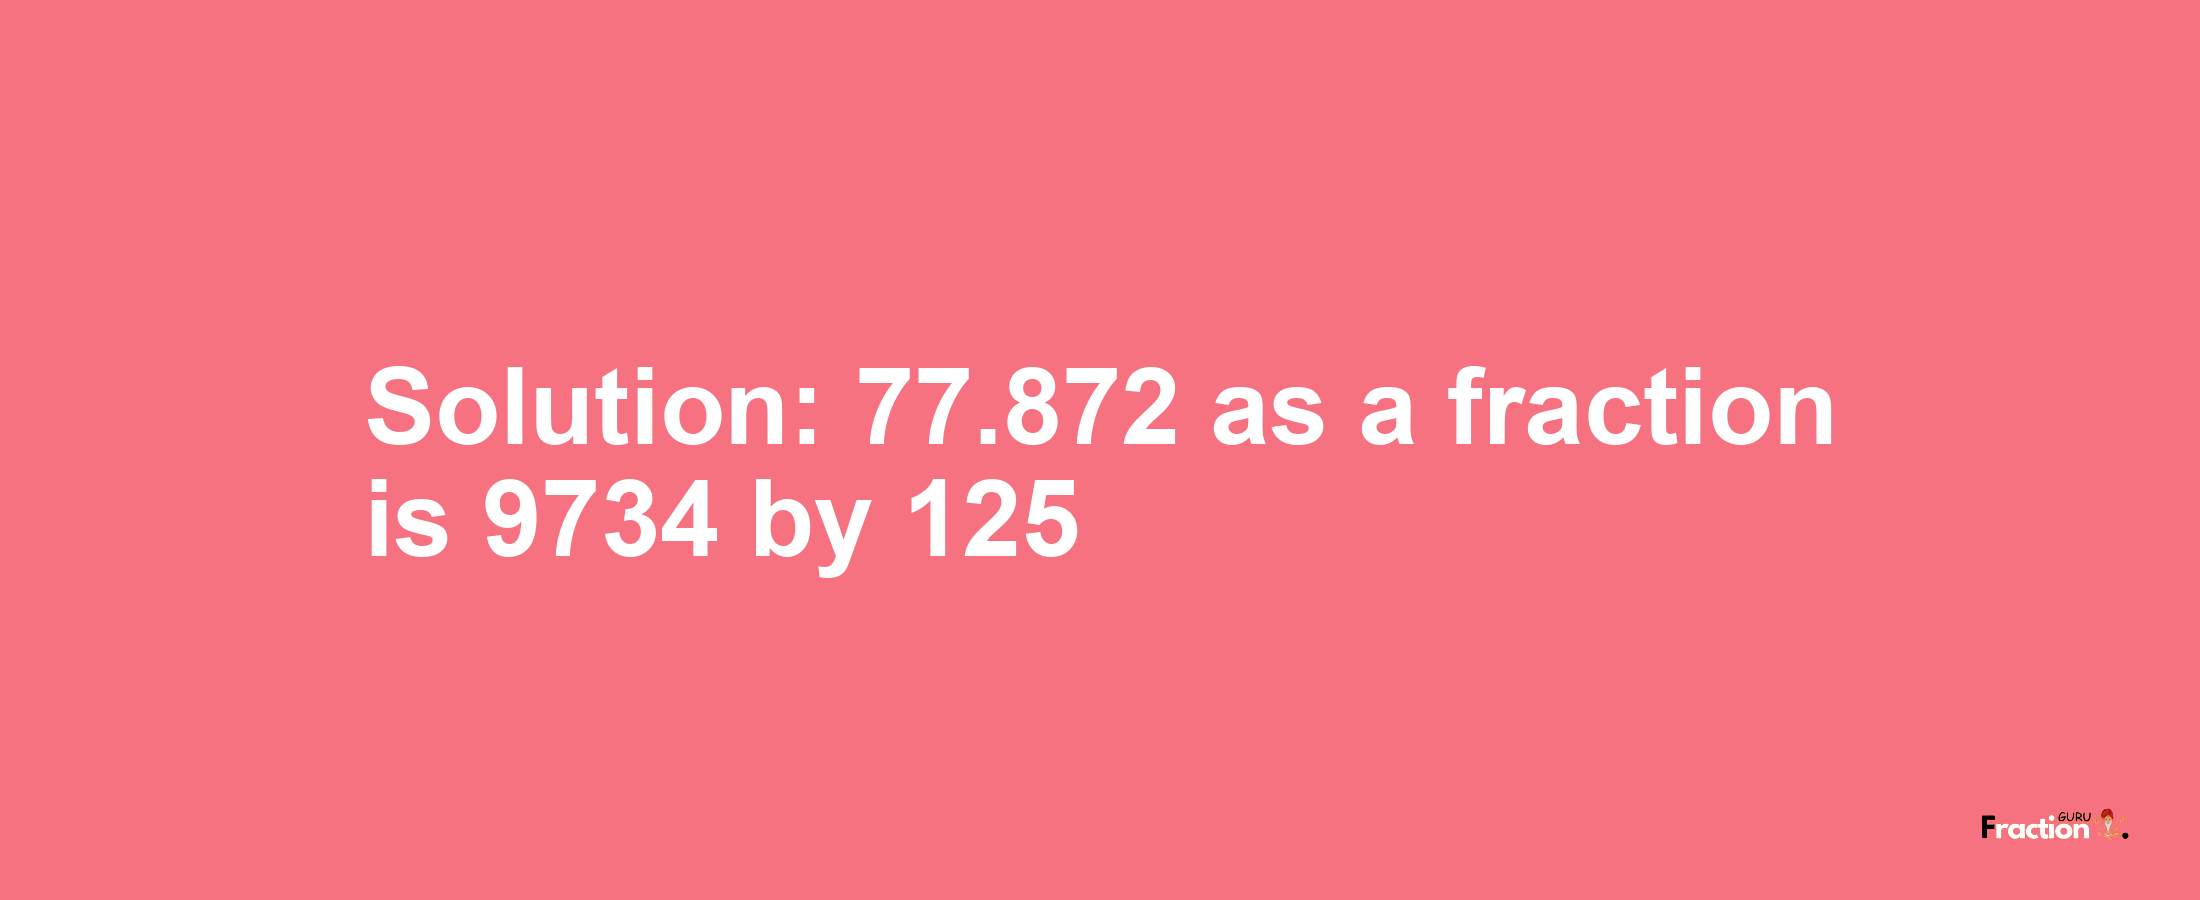 Solution:77.872 as a fraction is 9734/125